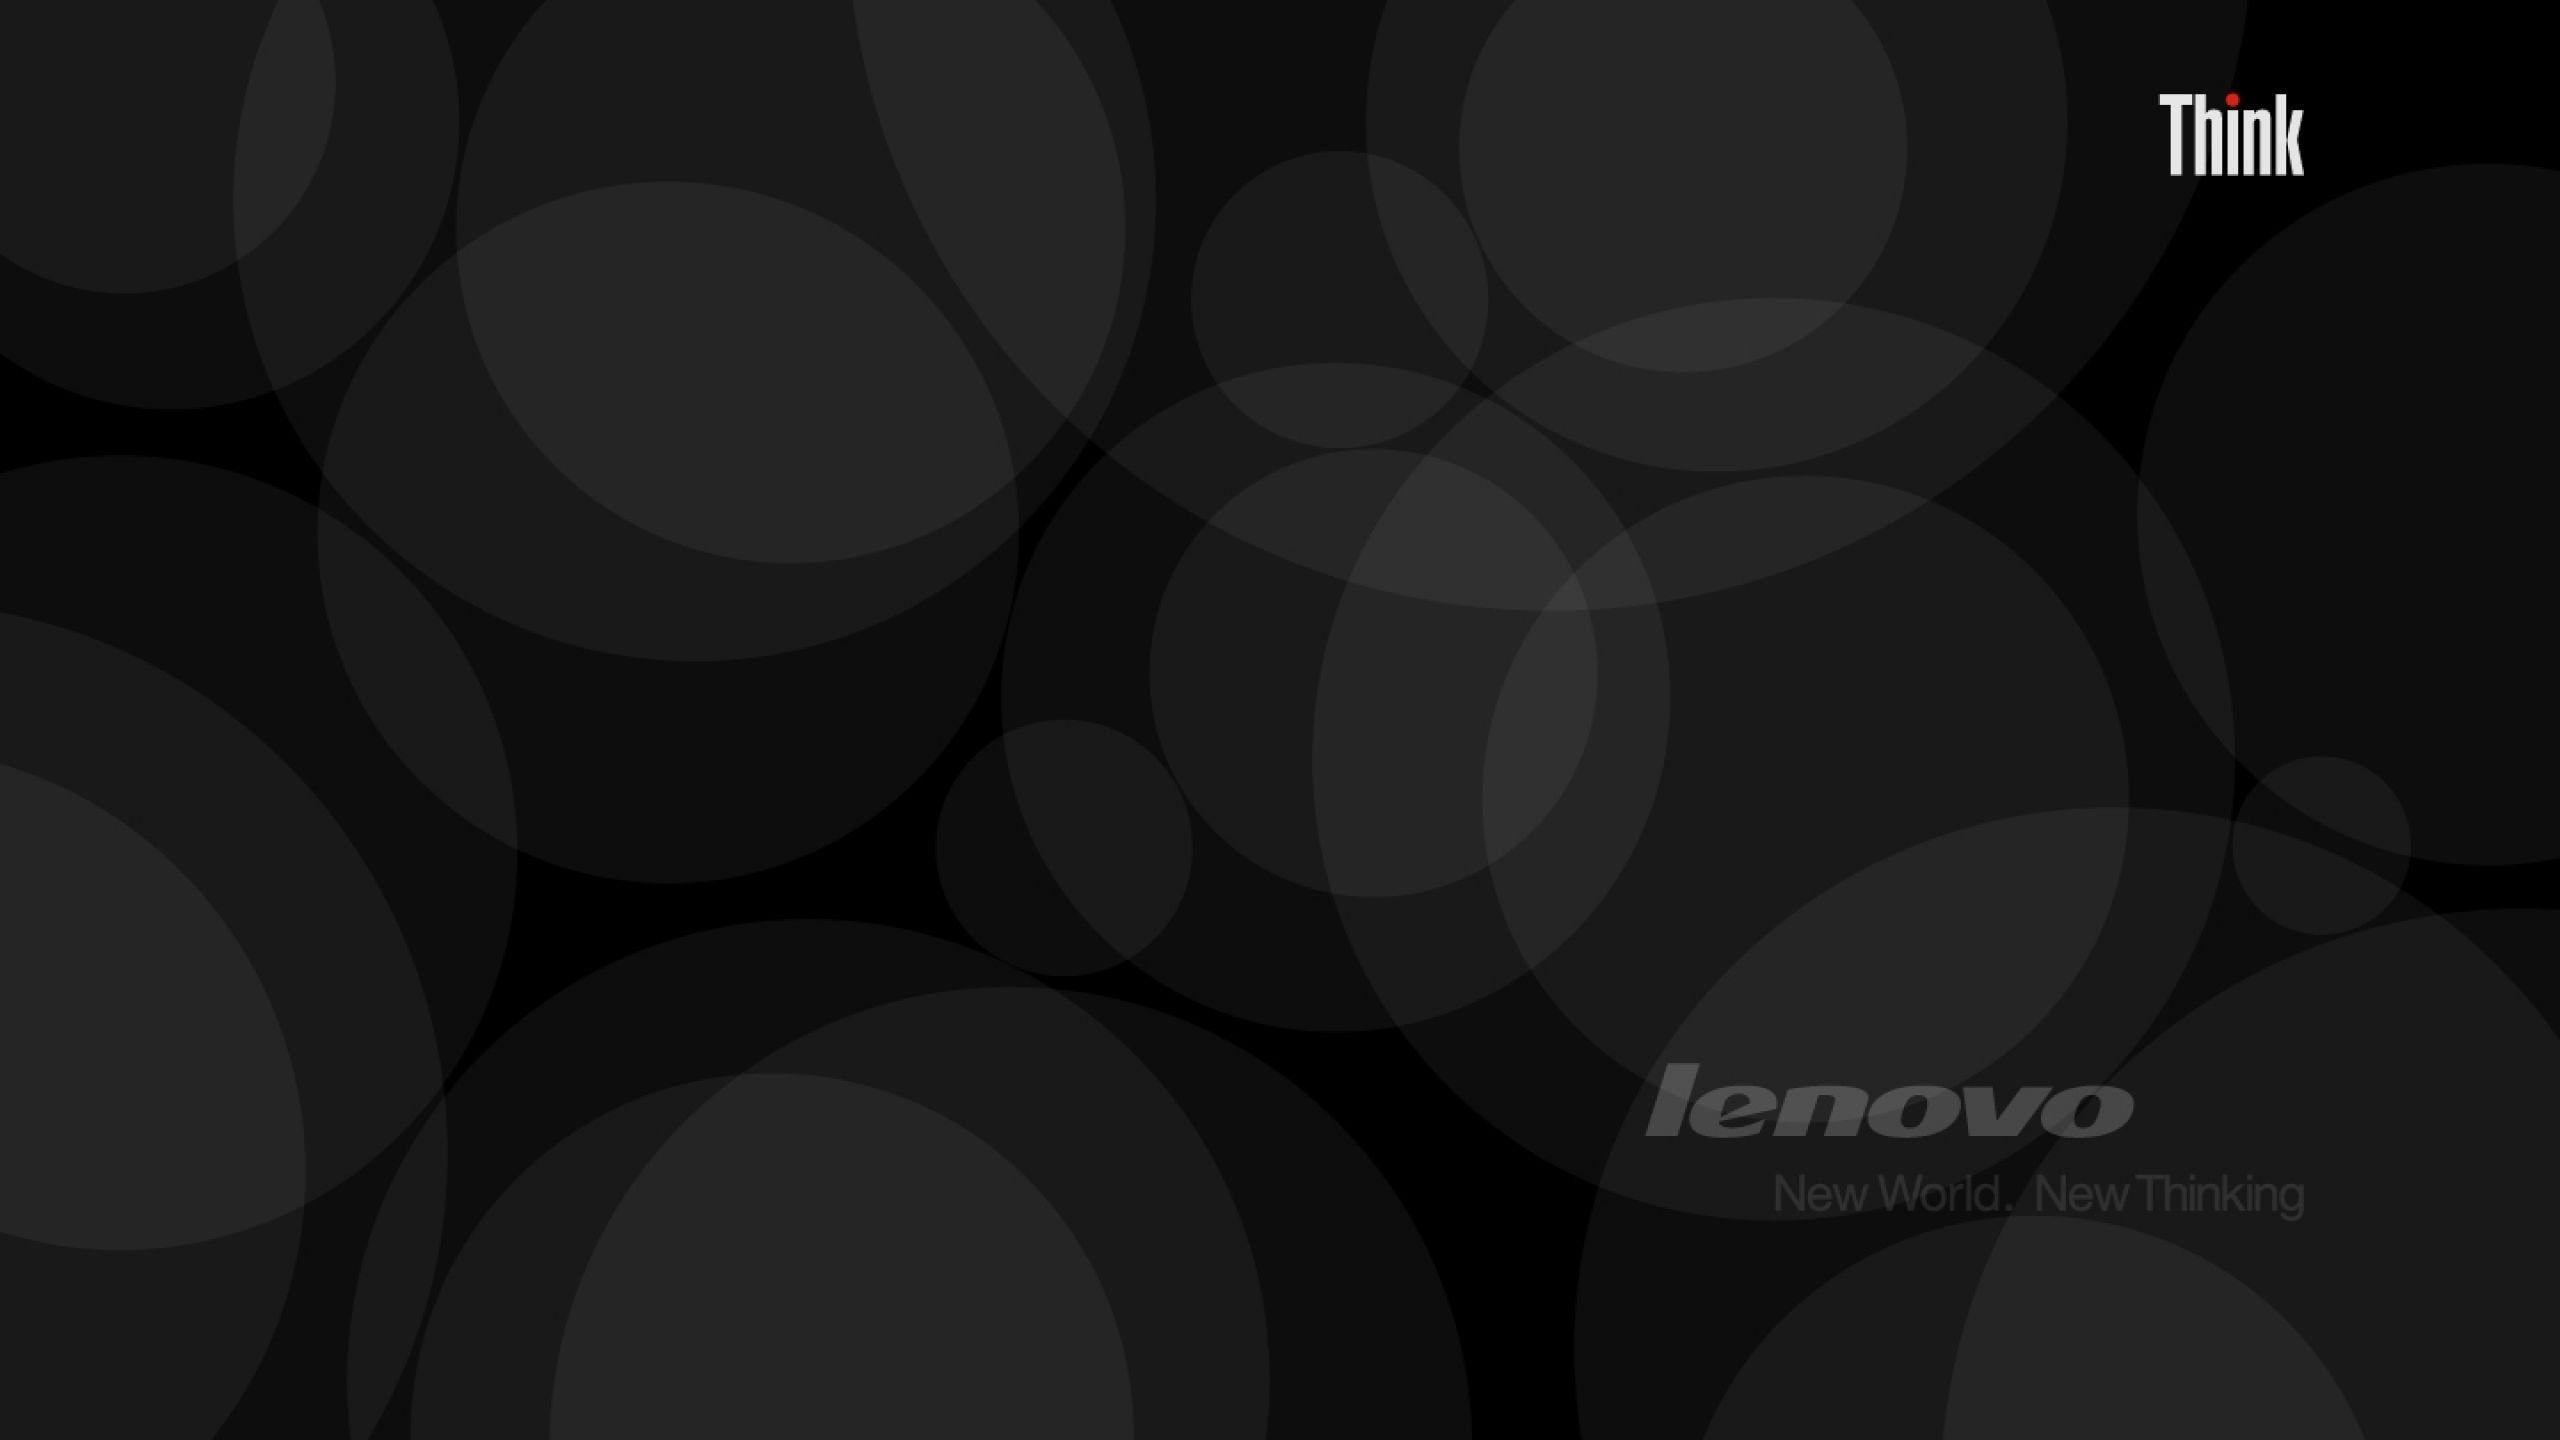 Download Lenovo Wallpaper Free for Android - Lenovo Wallpaper APK Download  - STEPrimo.com